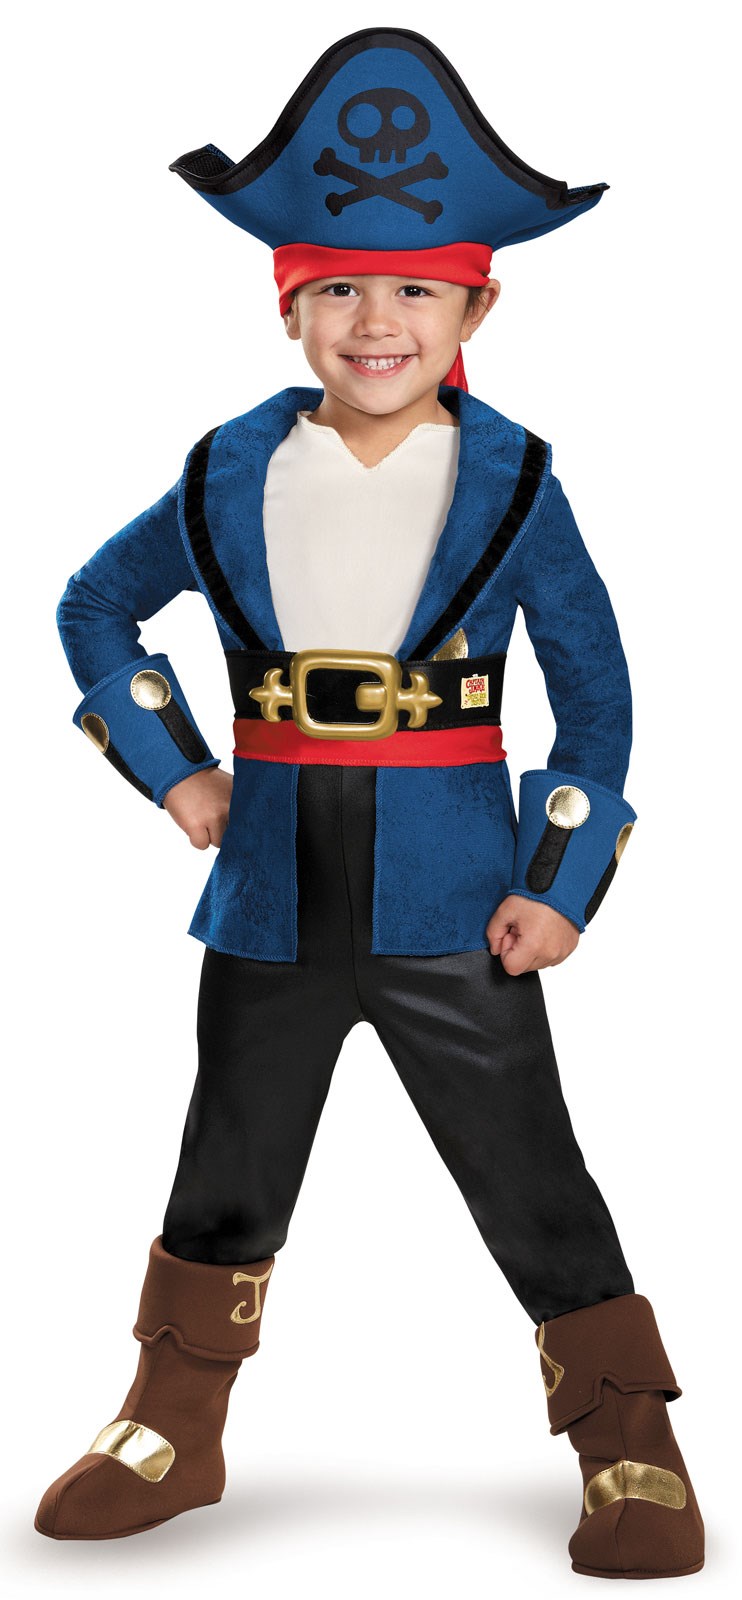 Captain Jake and the Never Land Pirates: Kids Deluxe Captain Jake Costume